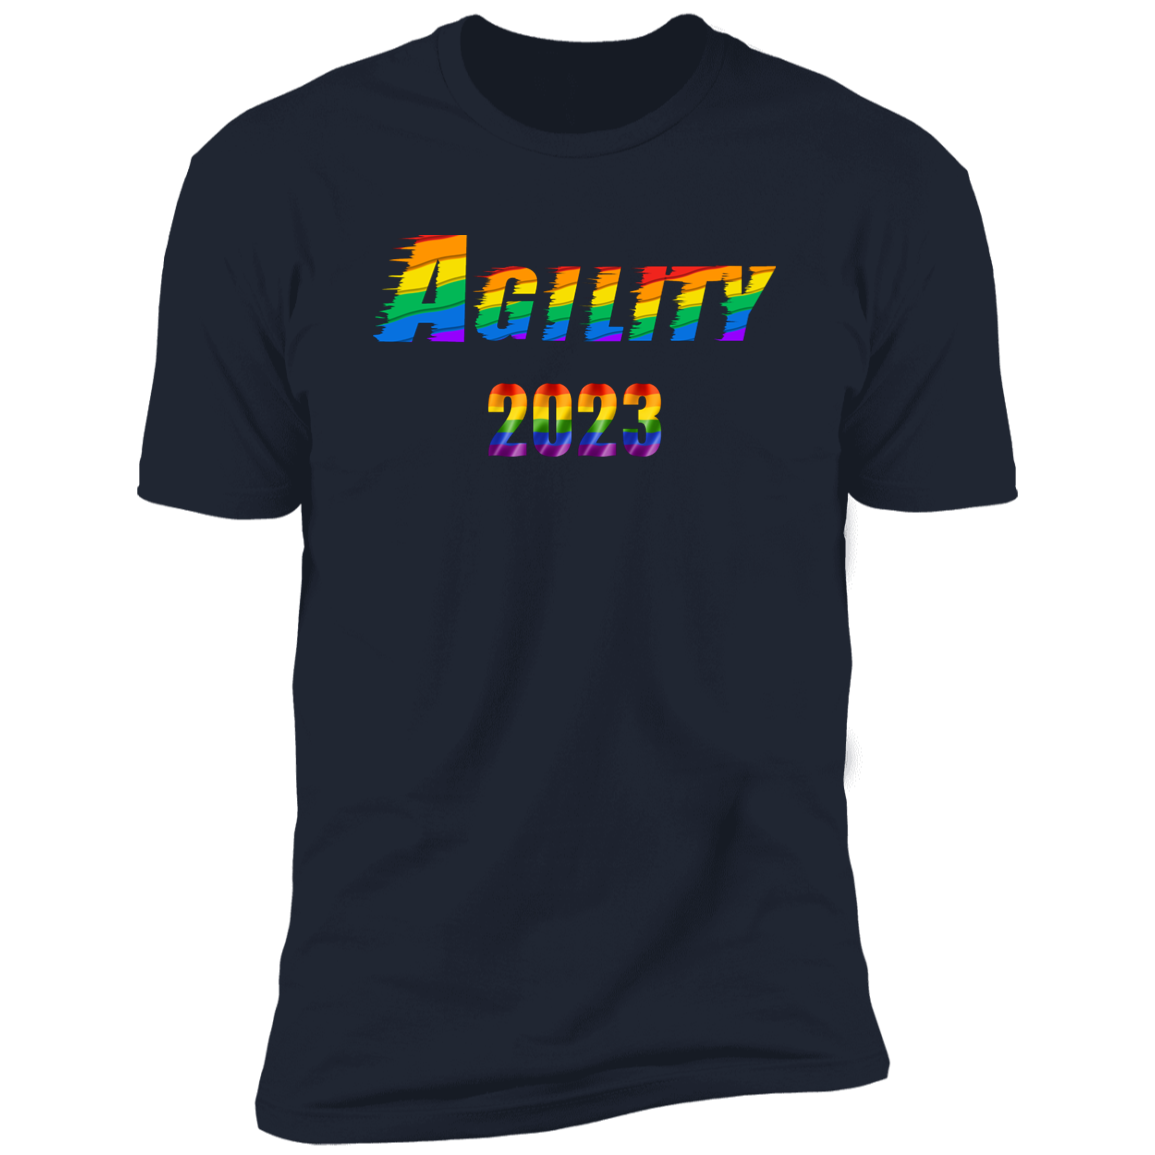 Agility Pride 2023 Cat pride t-shirt,  Agility pride shirt for humans, in navy blue